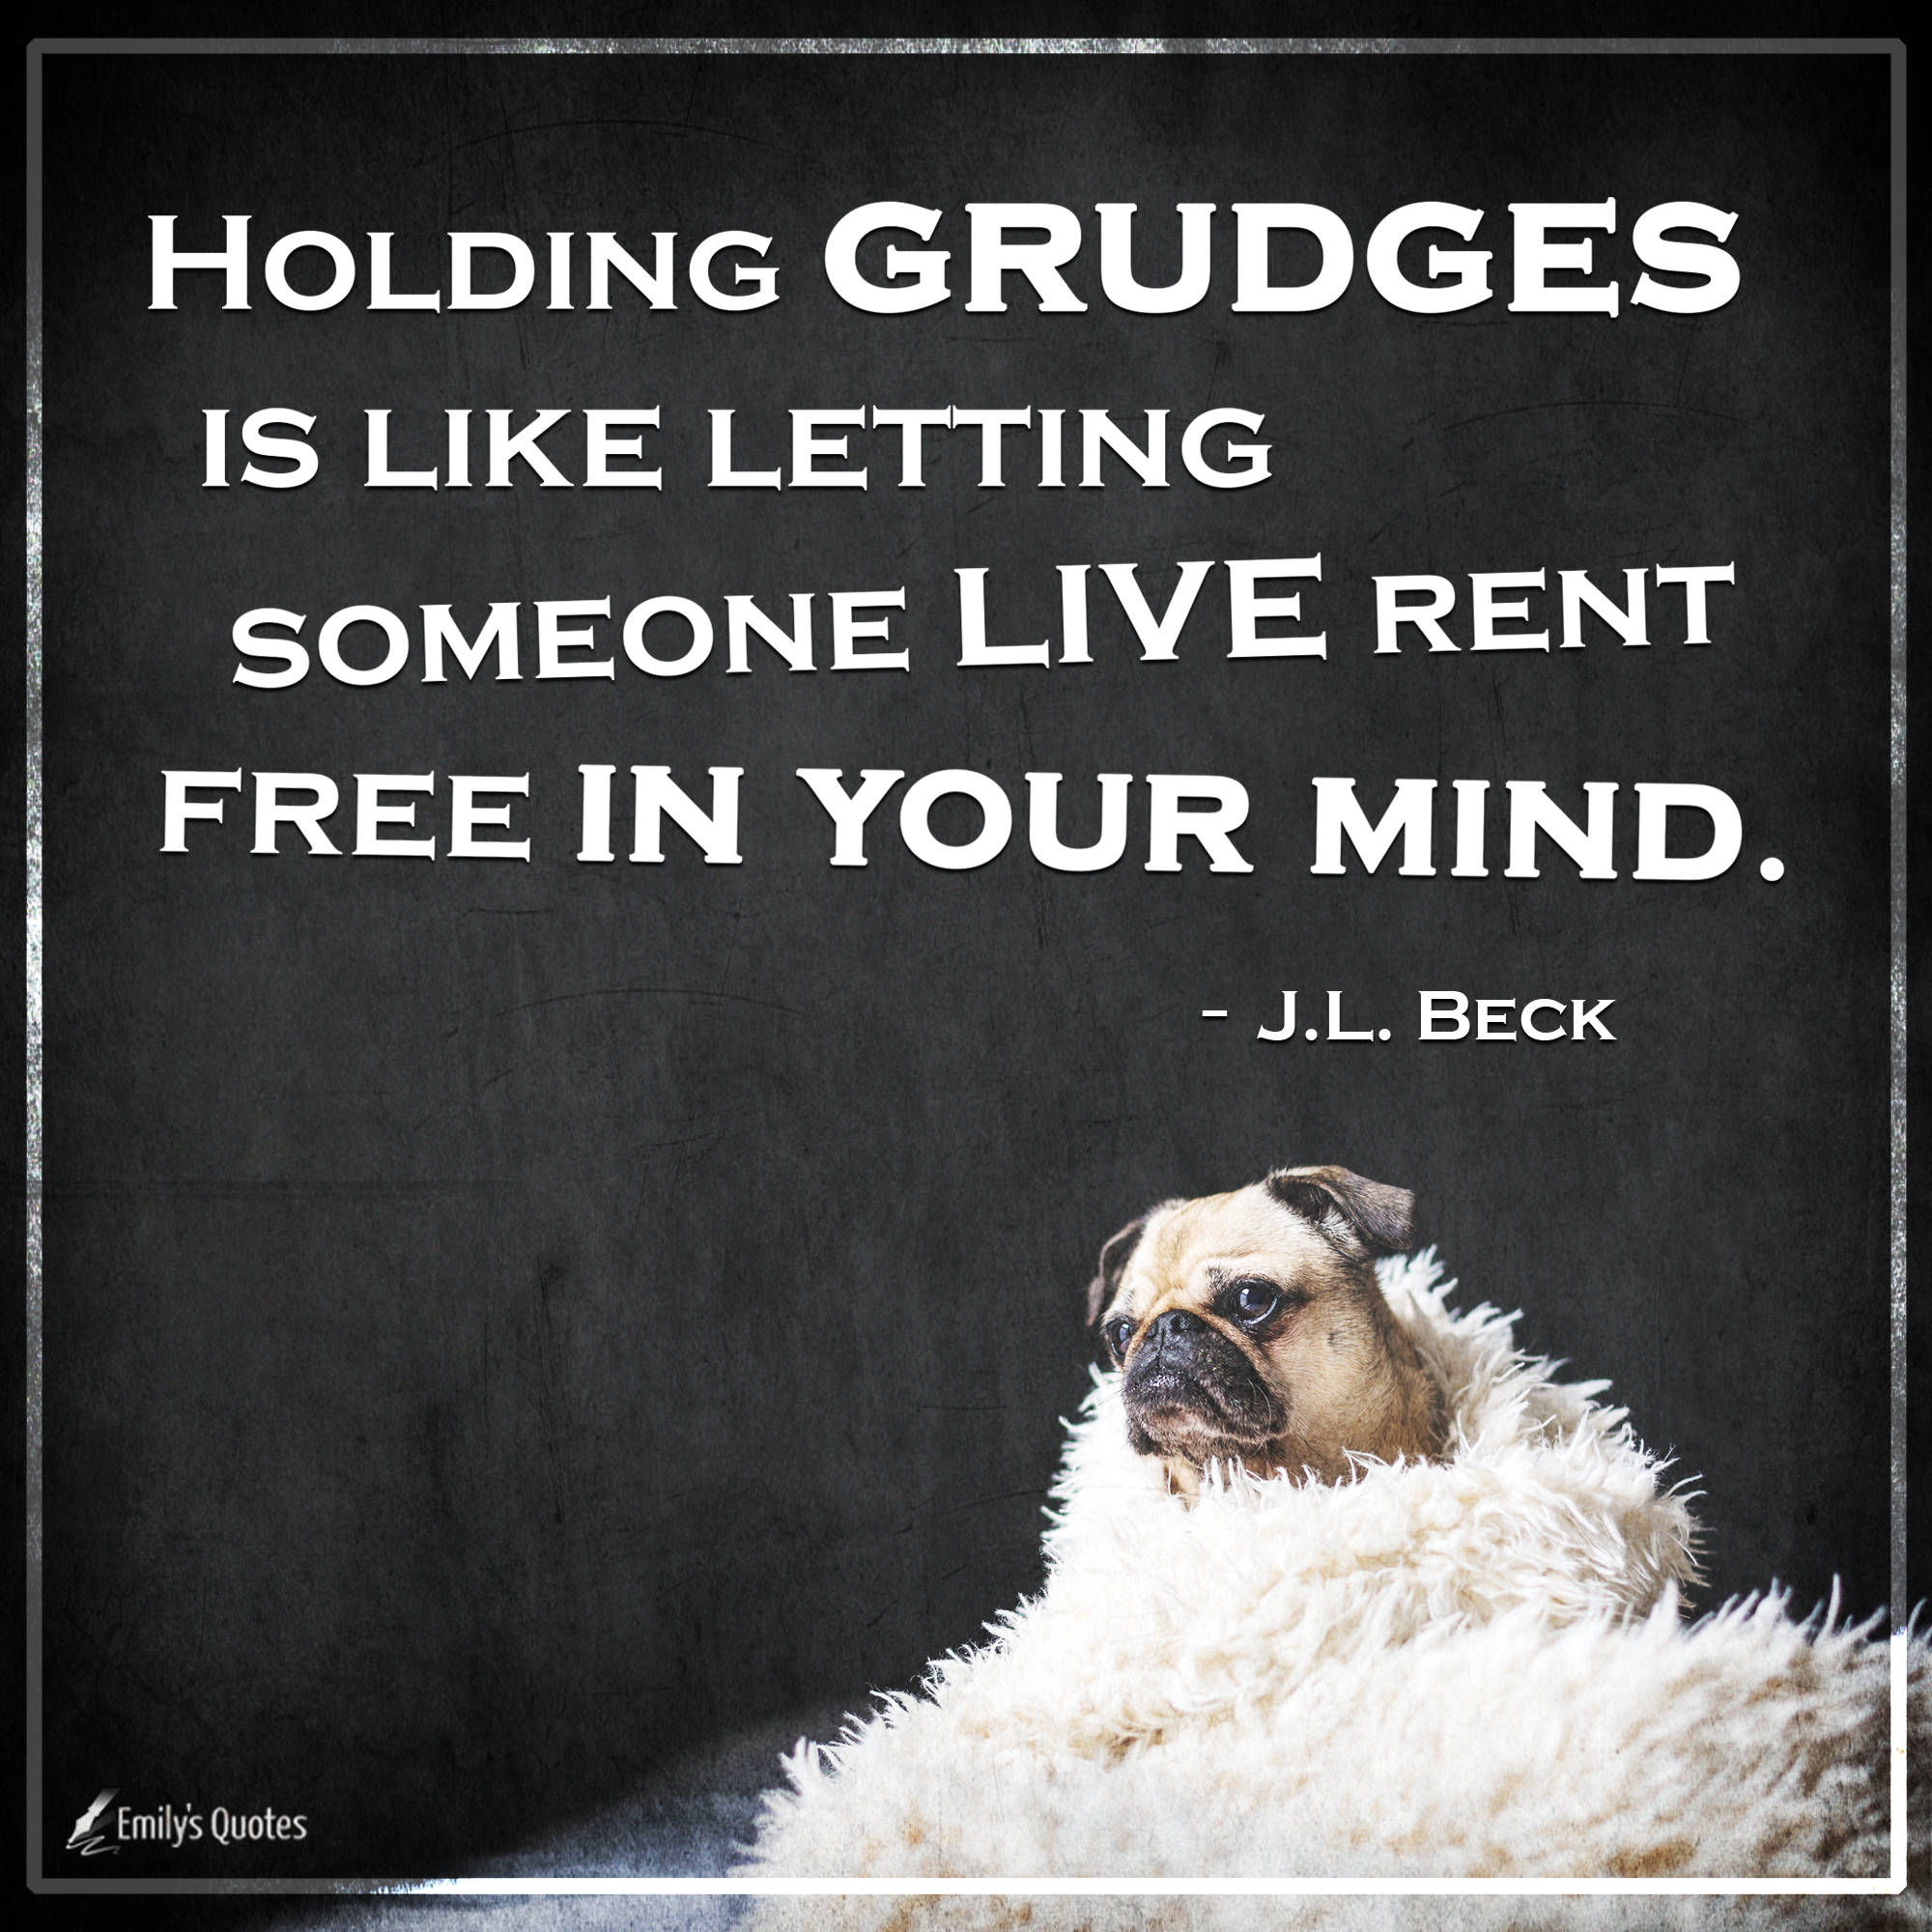 Holding grudges is like letting someone live rent free in your mind